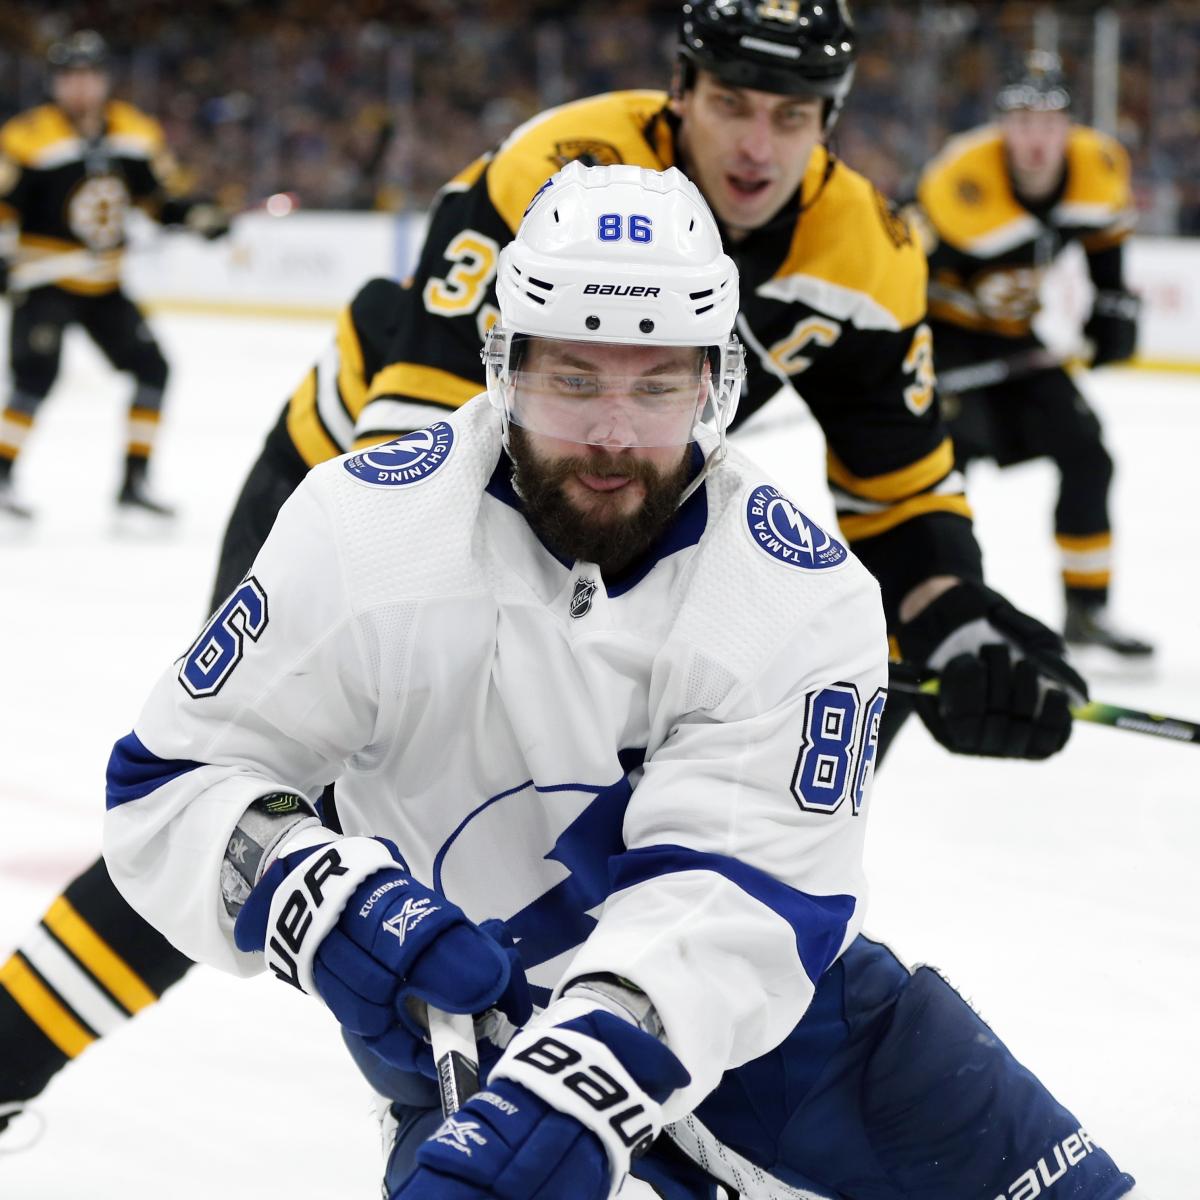 Stanley Cup Playoffs 2019: Full Schedule, TV Info and Predictions